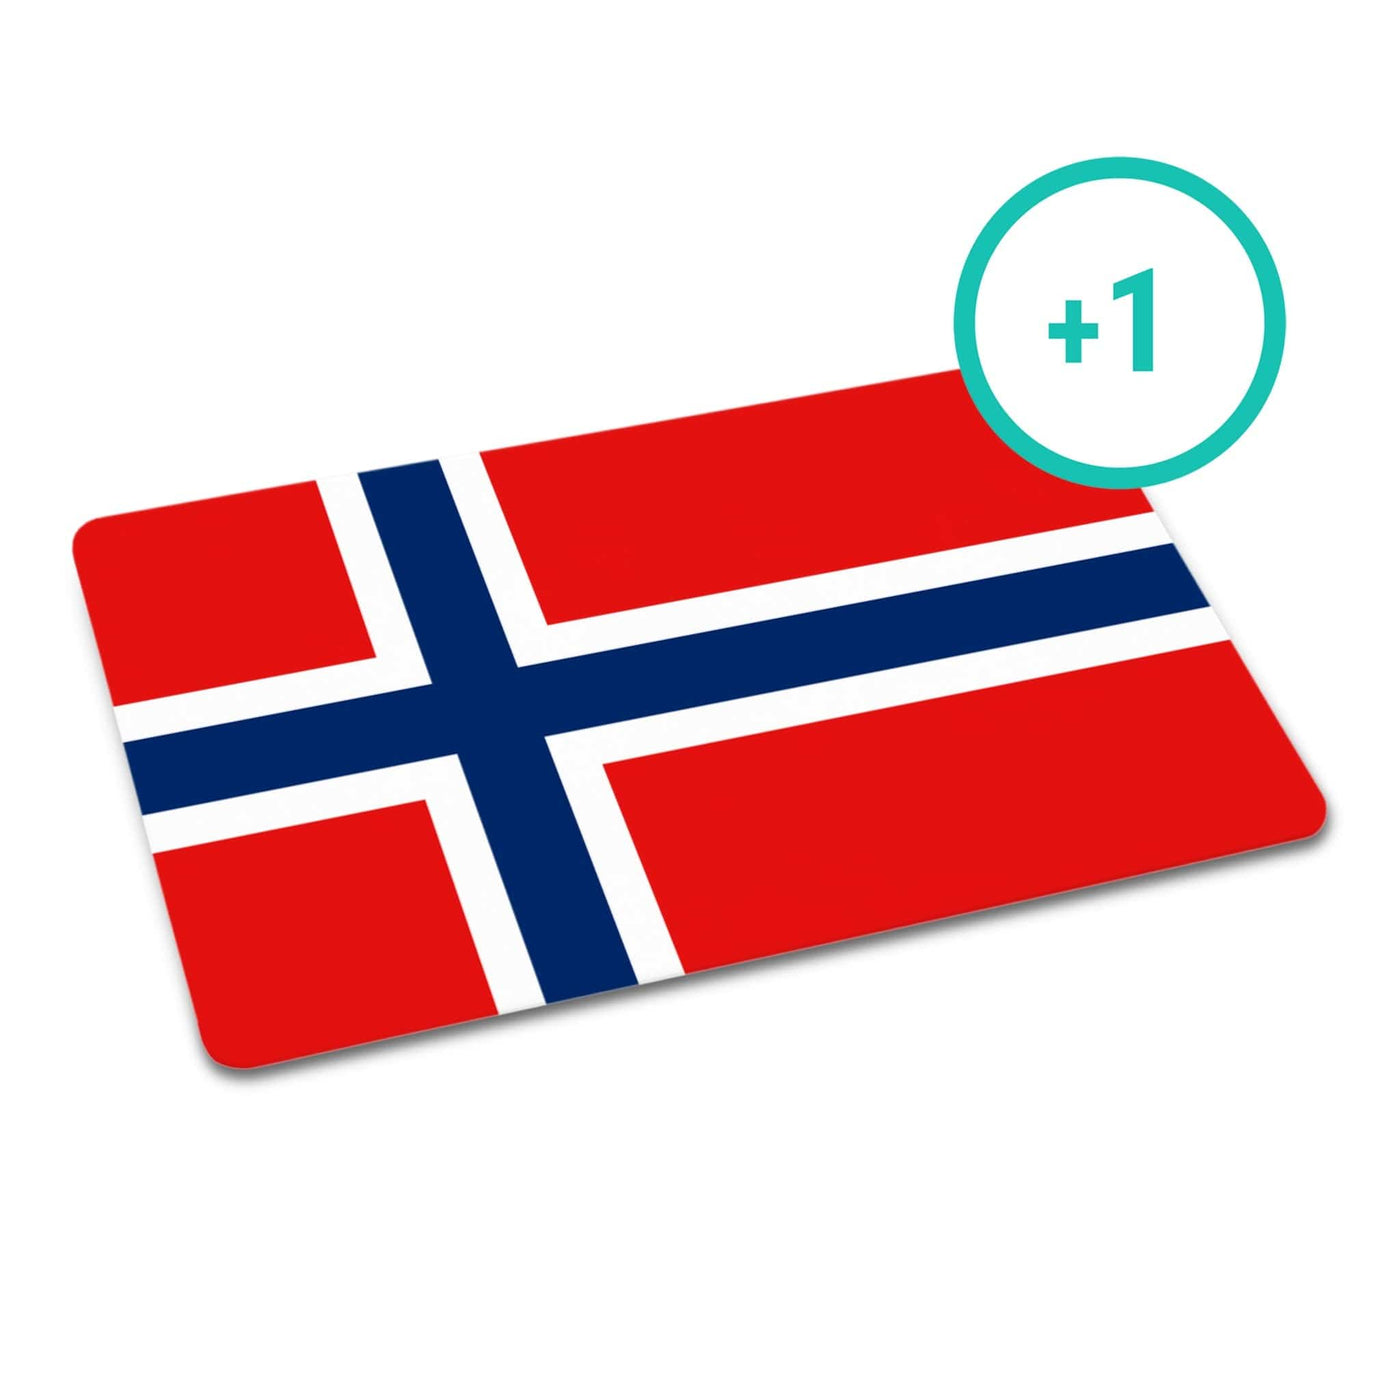 Additional Customized Card: Norwegian (Leave in cart to purchase)